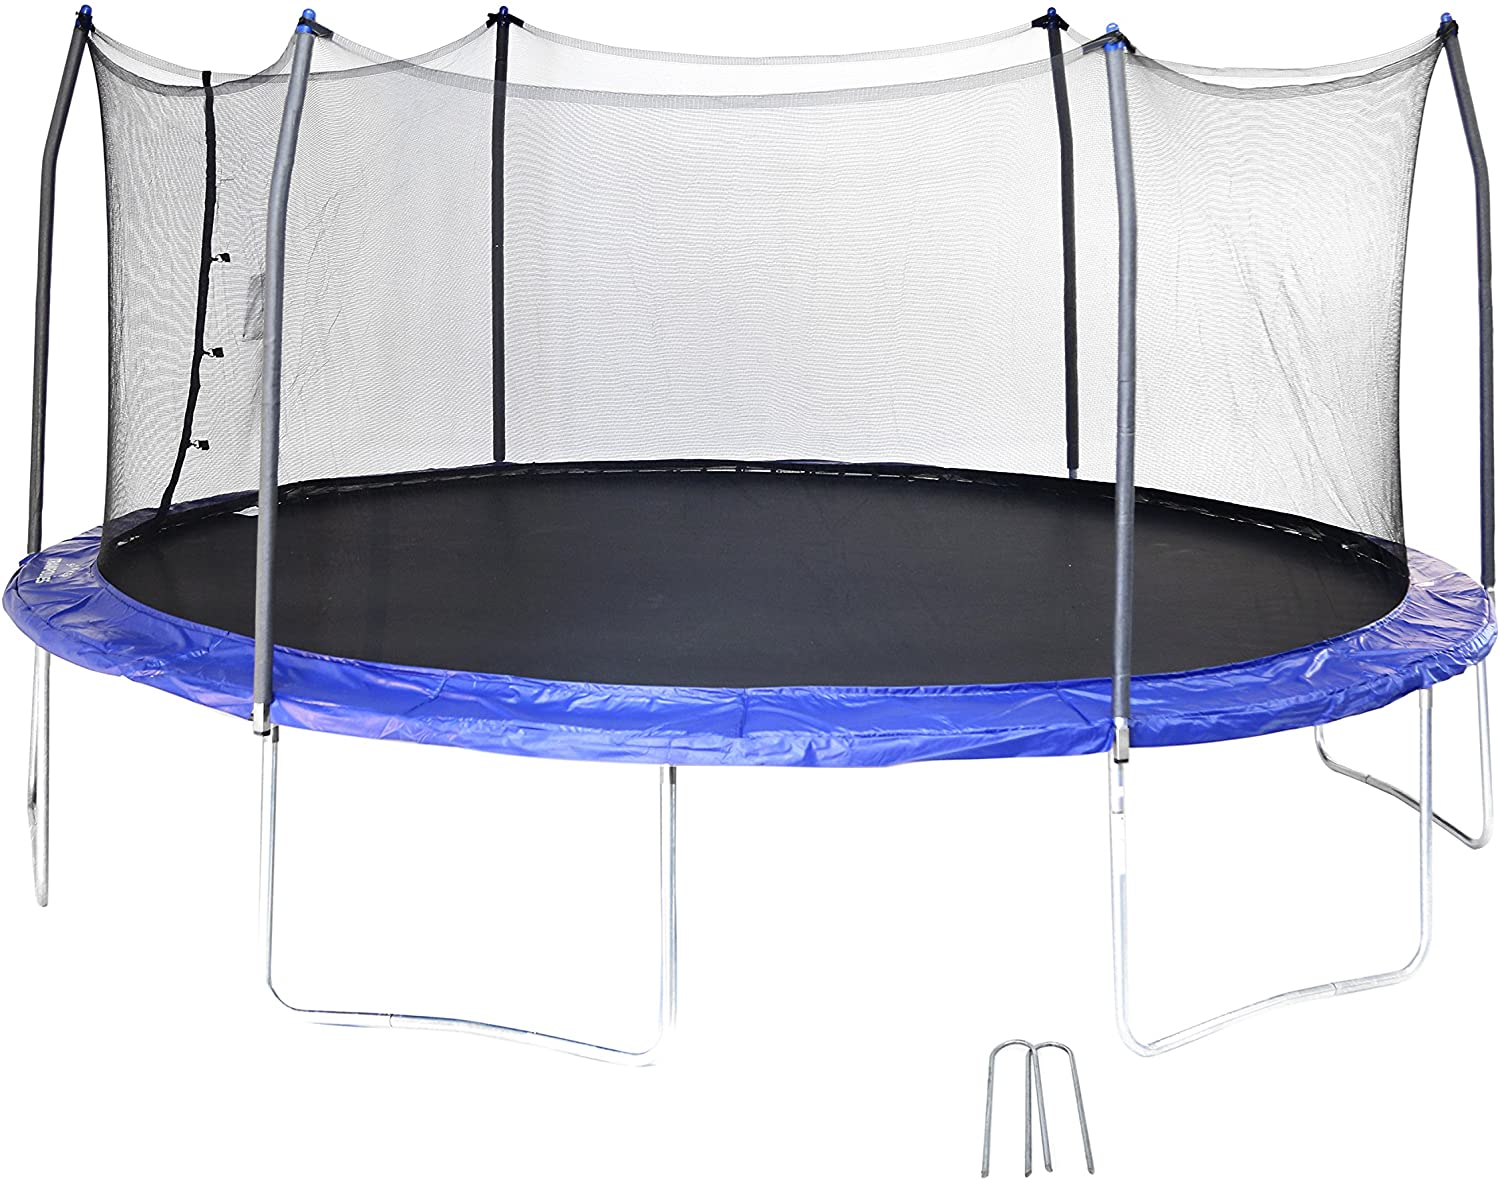 Skywalker Oval 17 Feet Trampoline and Enclosure with Wind Stakes